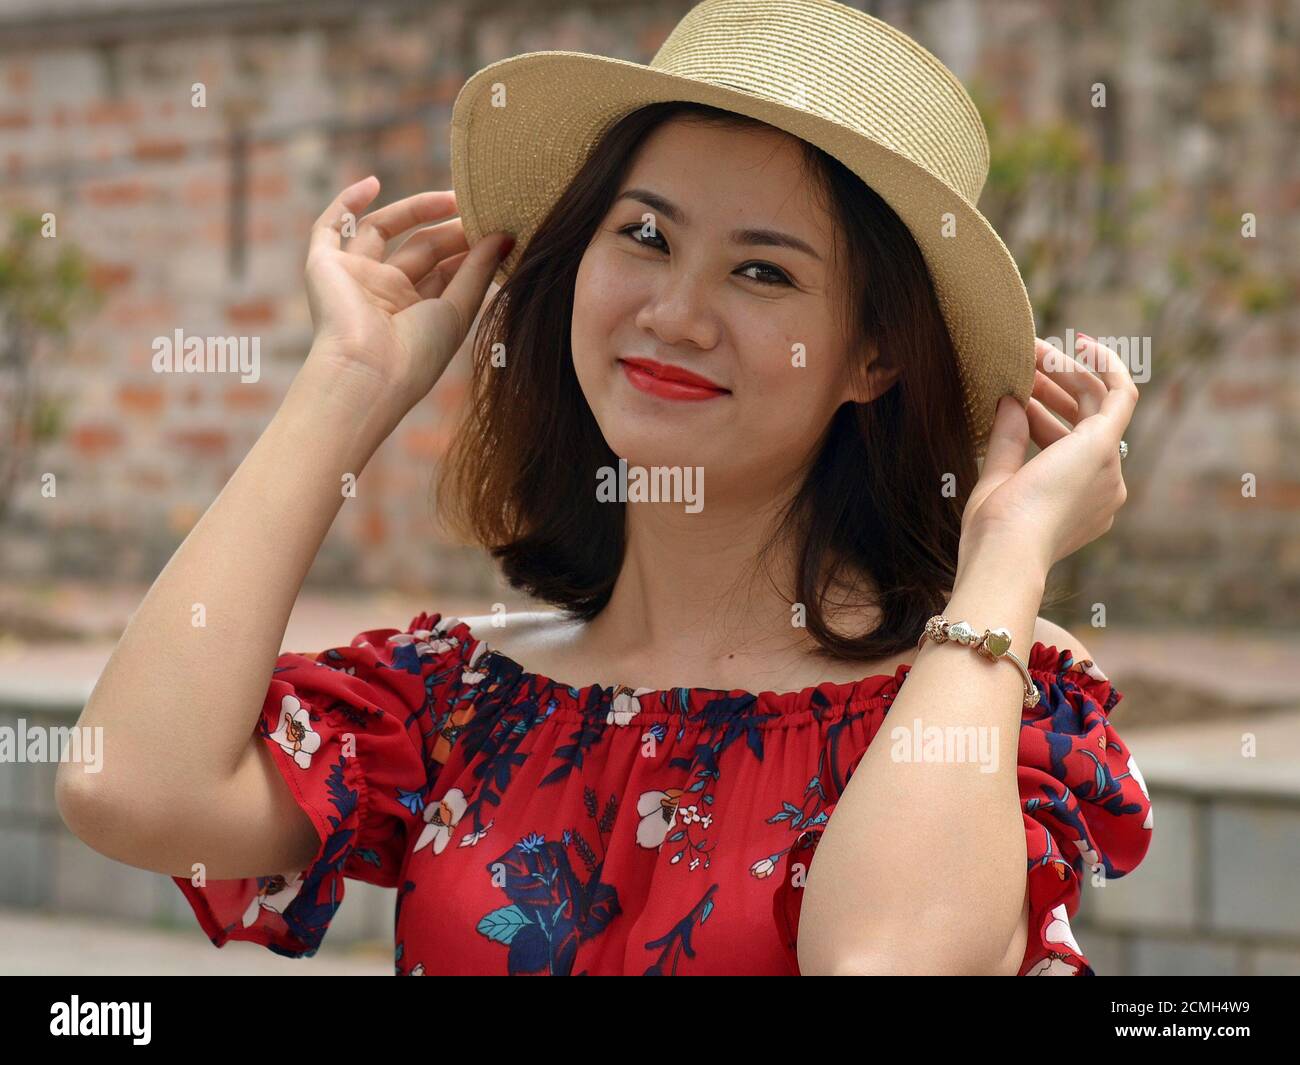 Beautiful young Vietnamese woman wears an Amish-style straw hat, holds the brim of the hat with both hands, and poses for the camera. Stock Photo